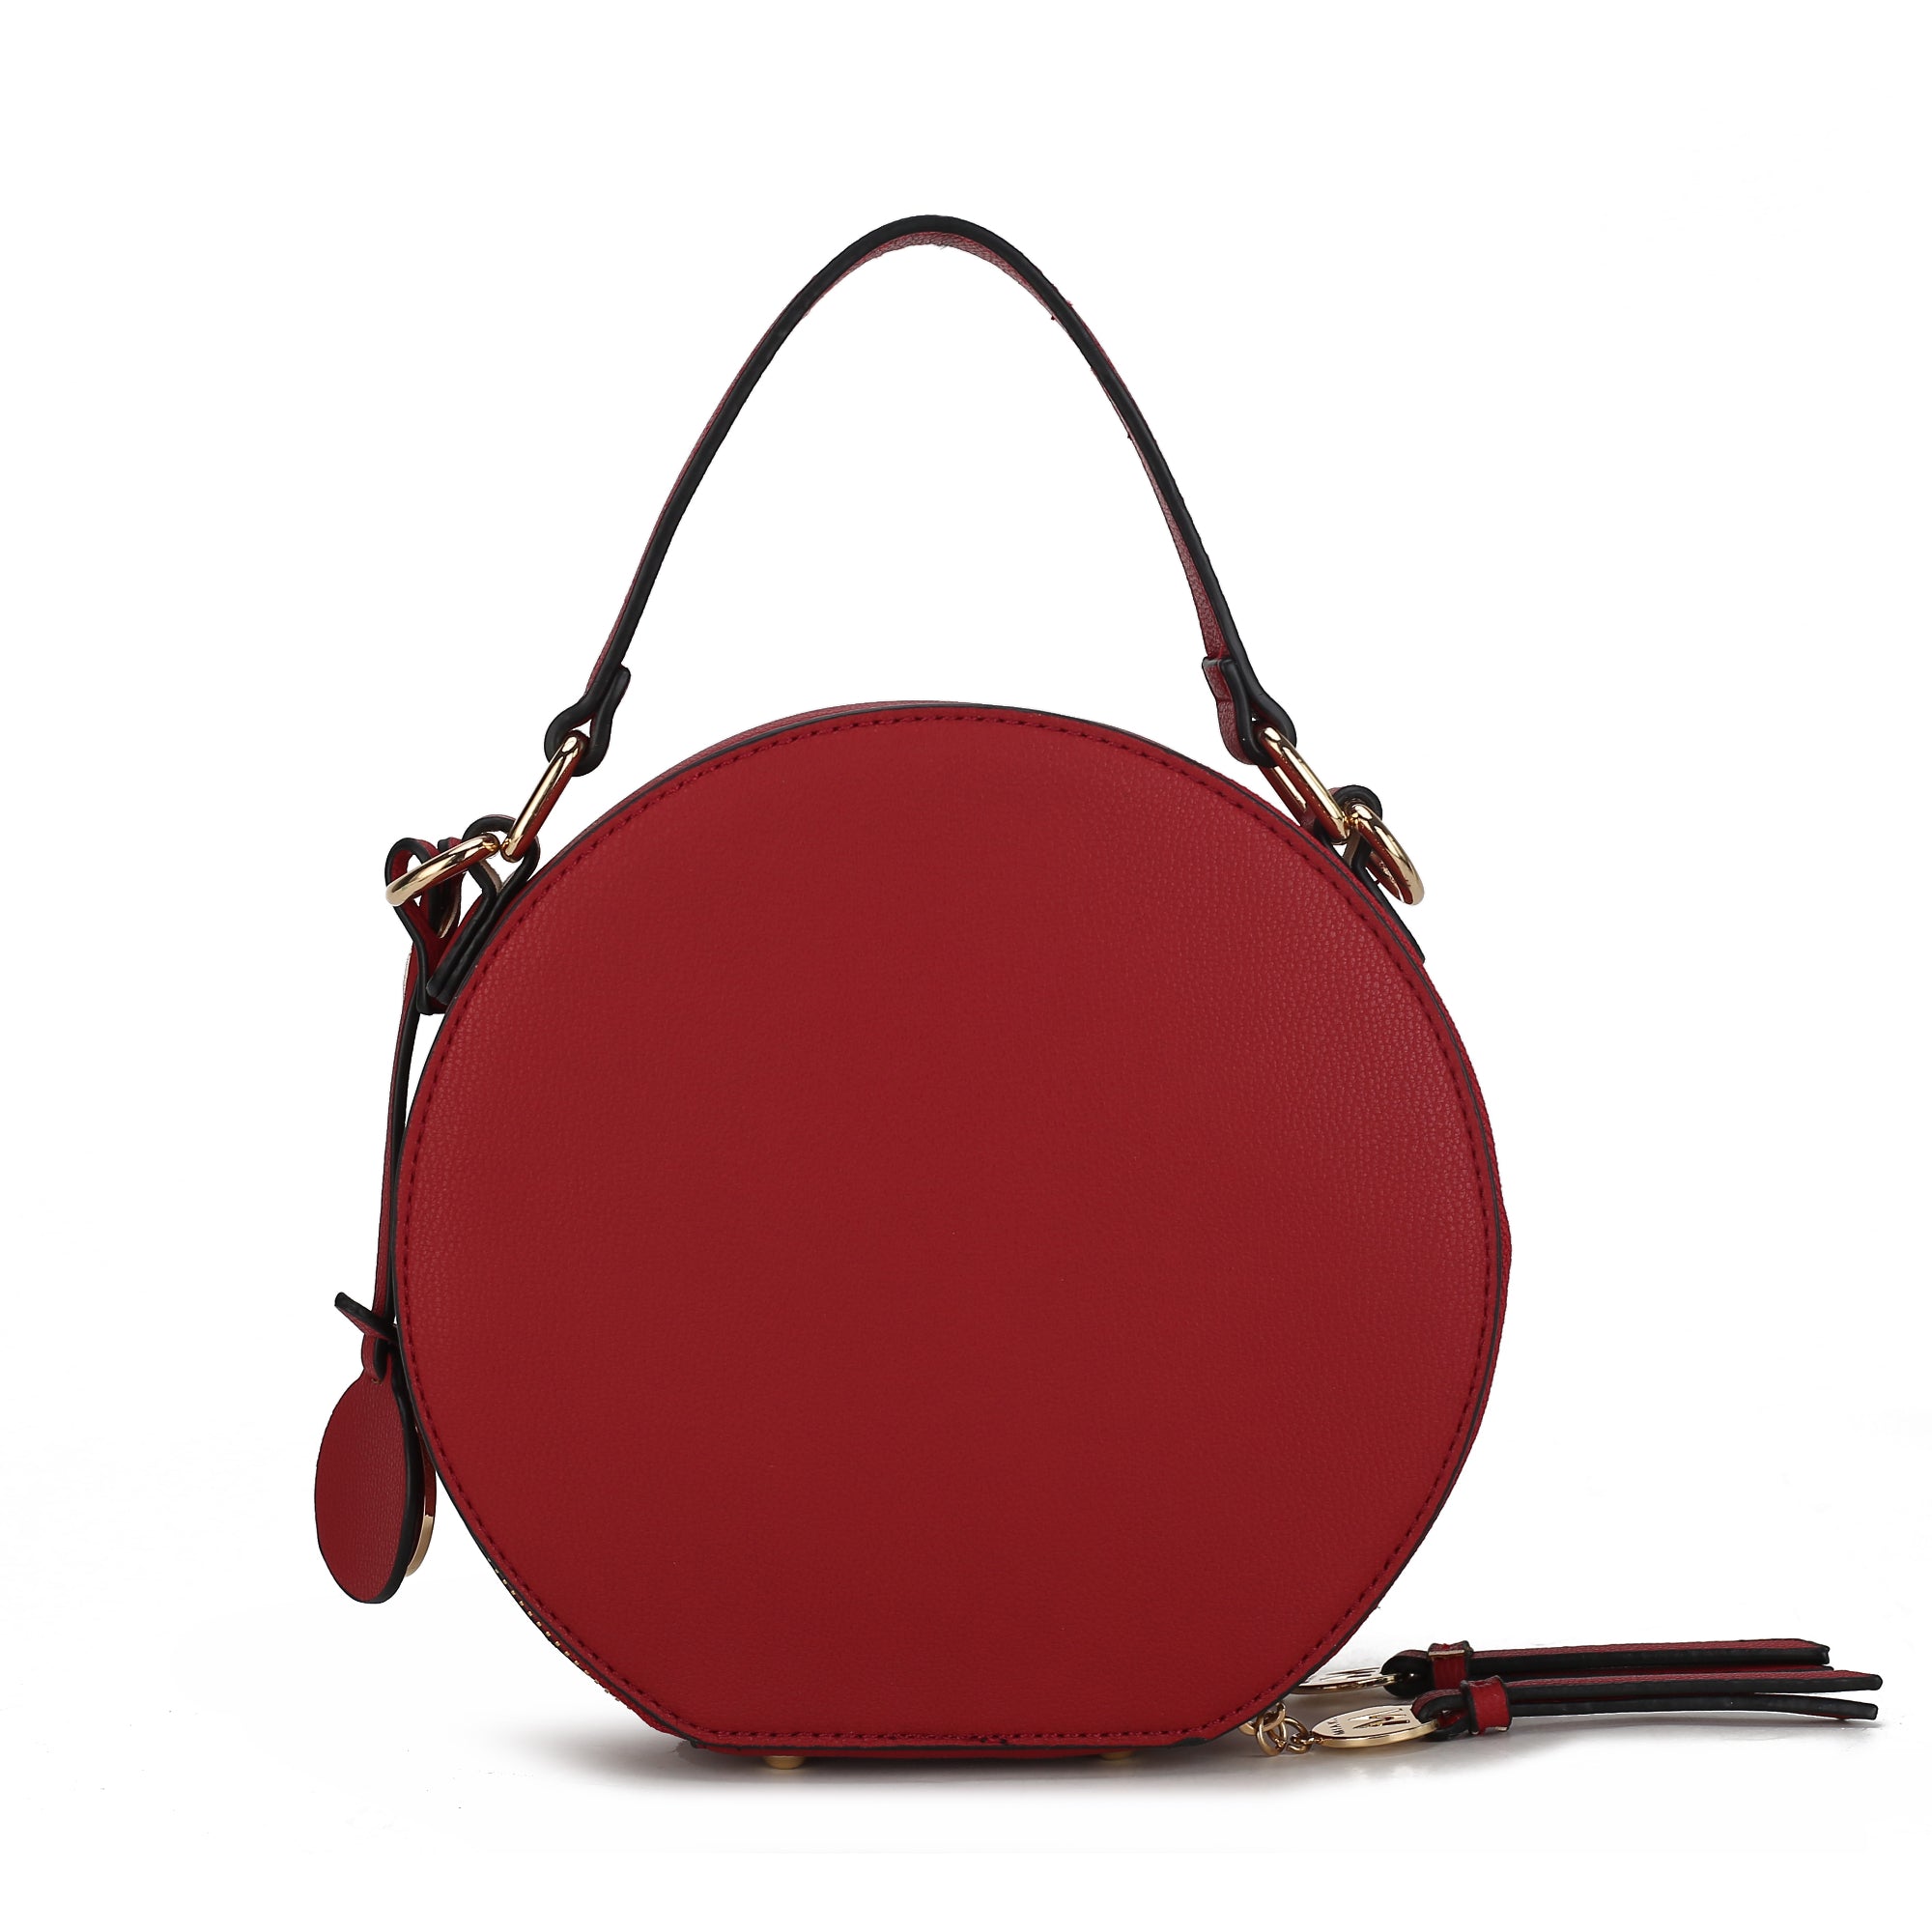 Lydie Multi Compartment Crossbody Bag - TJ Outlet